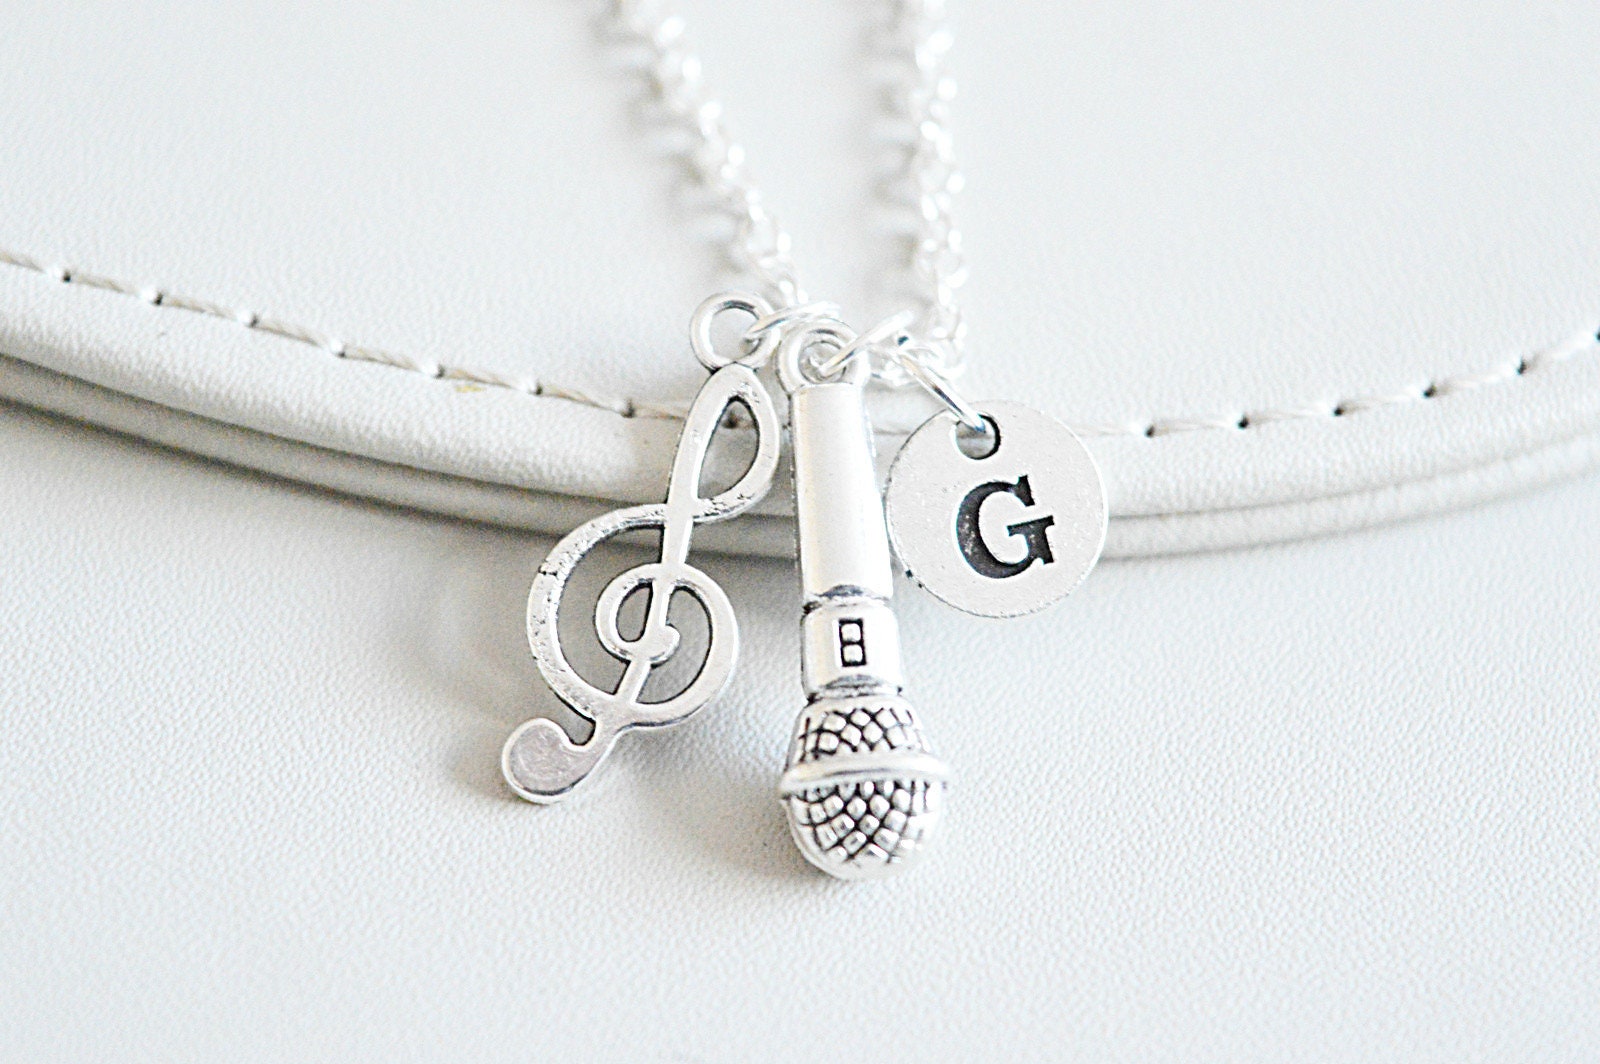 14. Music Necklace